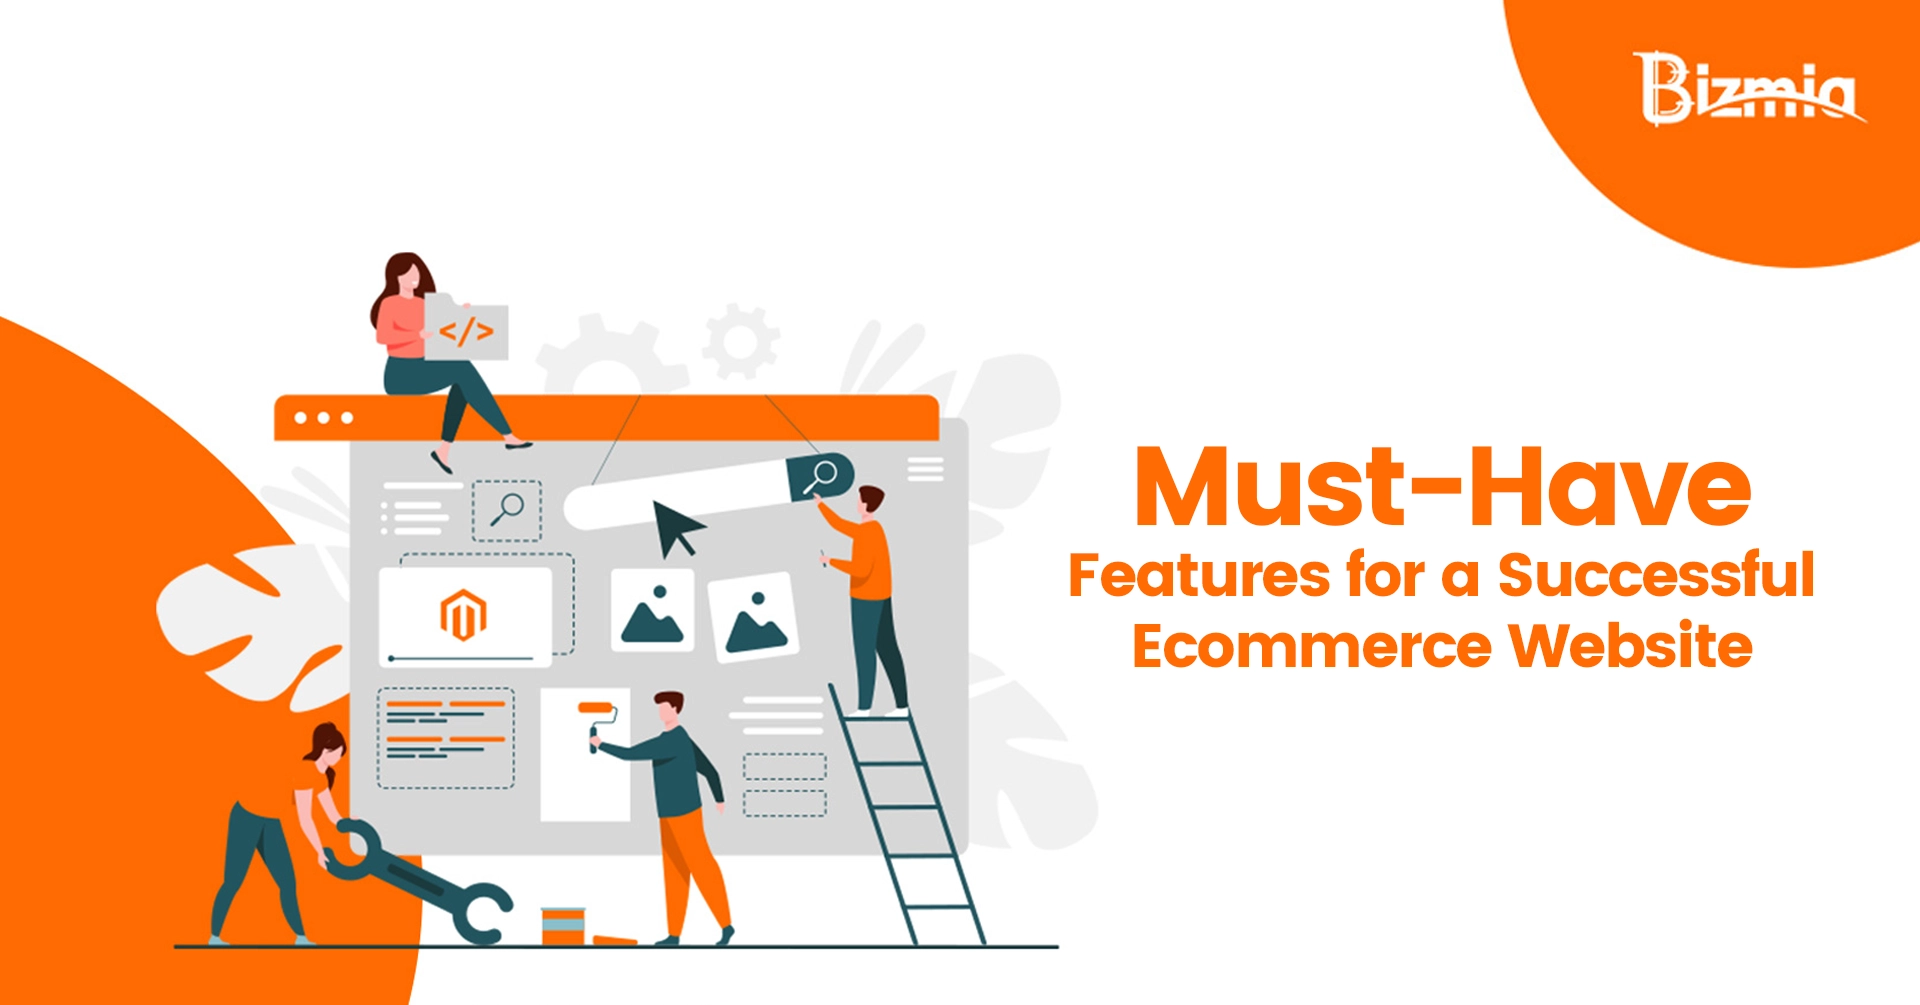 Features for a Successful Ecommerce Store